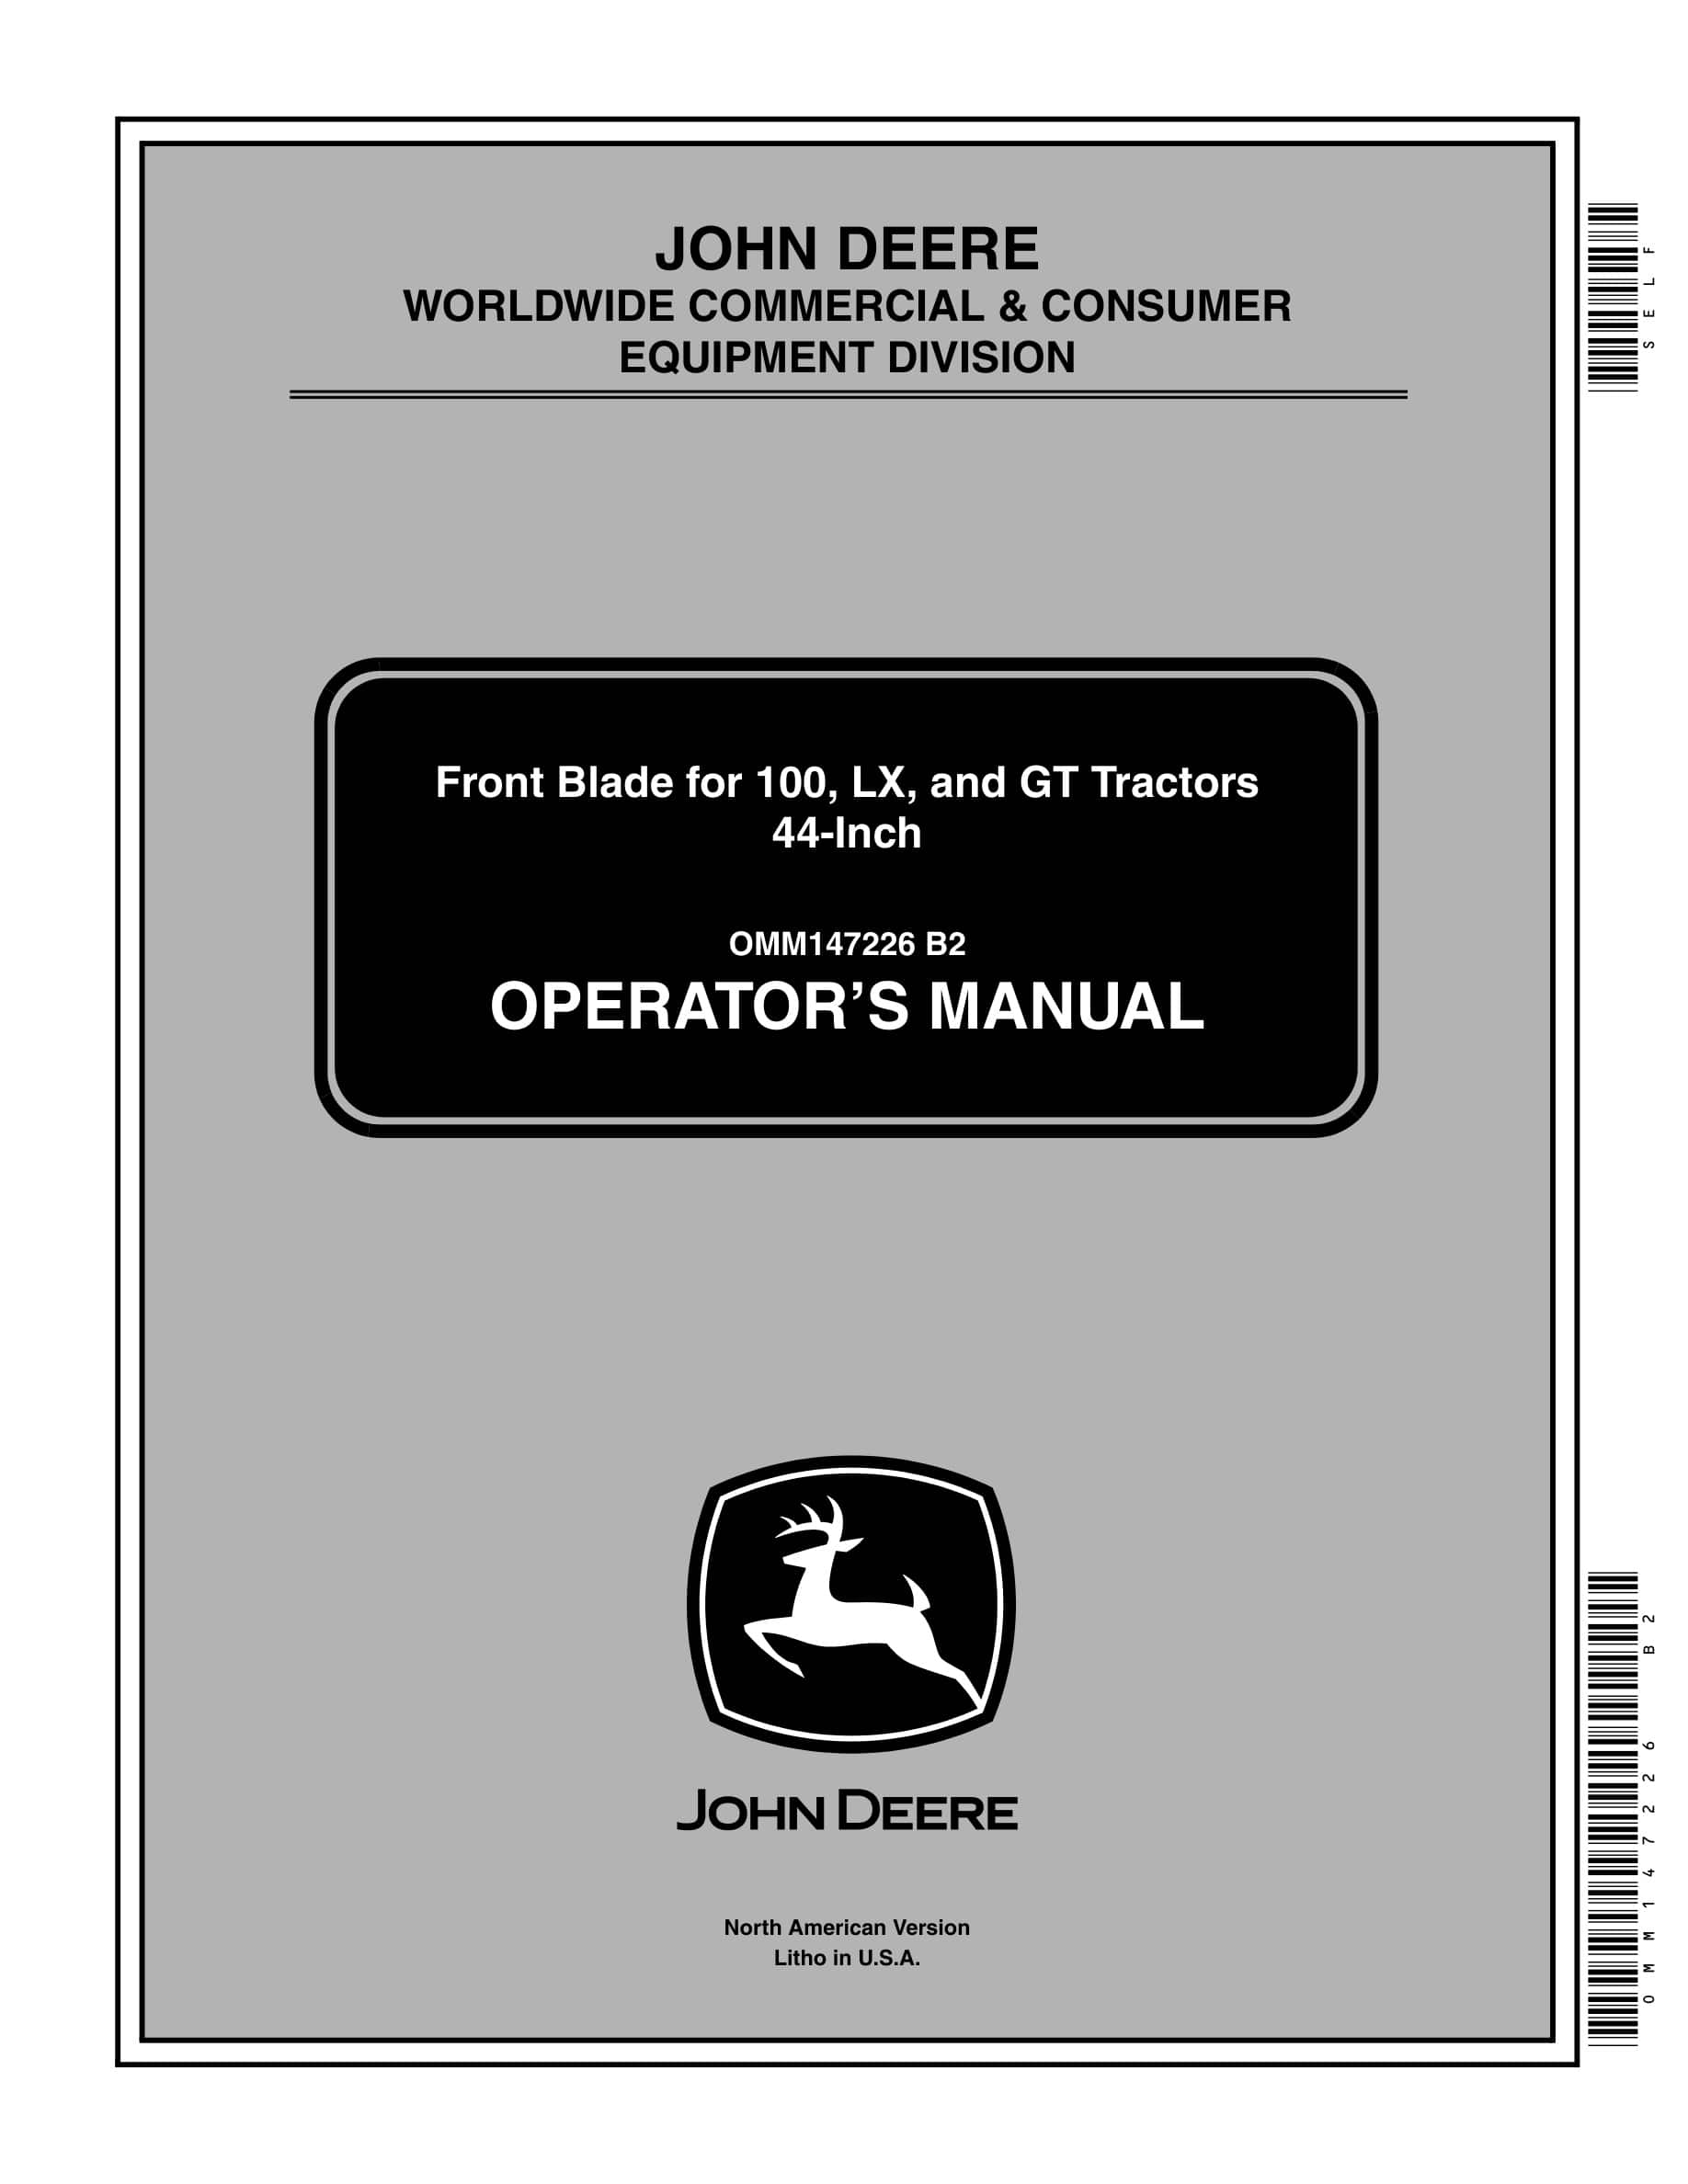 John Deere Front Blade For 100, Lx, And Gt 44-inch Tractors Operator Manuals OMM147226-1